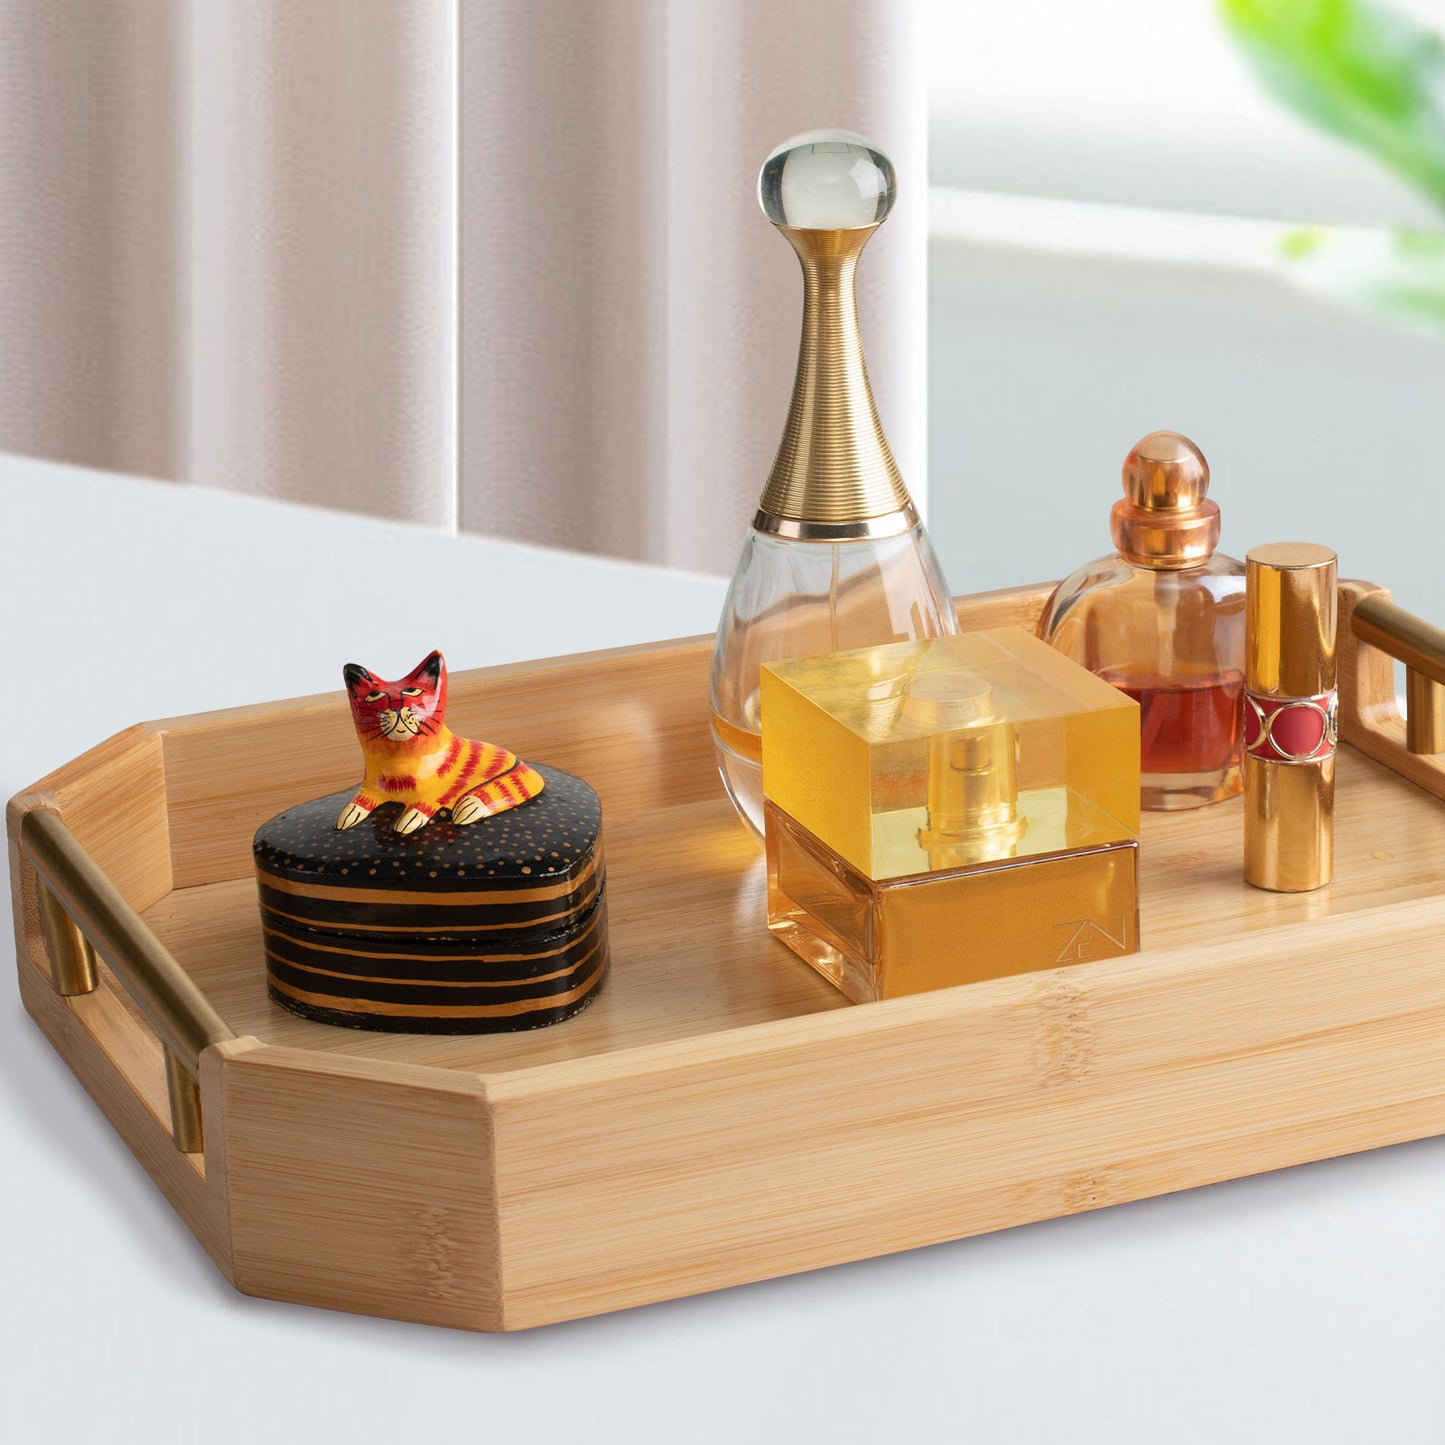 Natural Thickened Bamboo Serving Tray